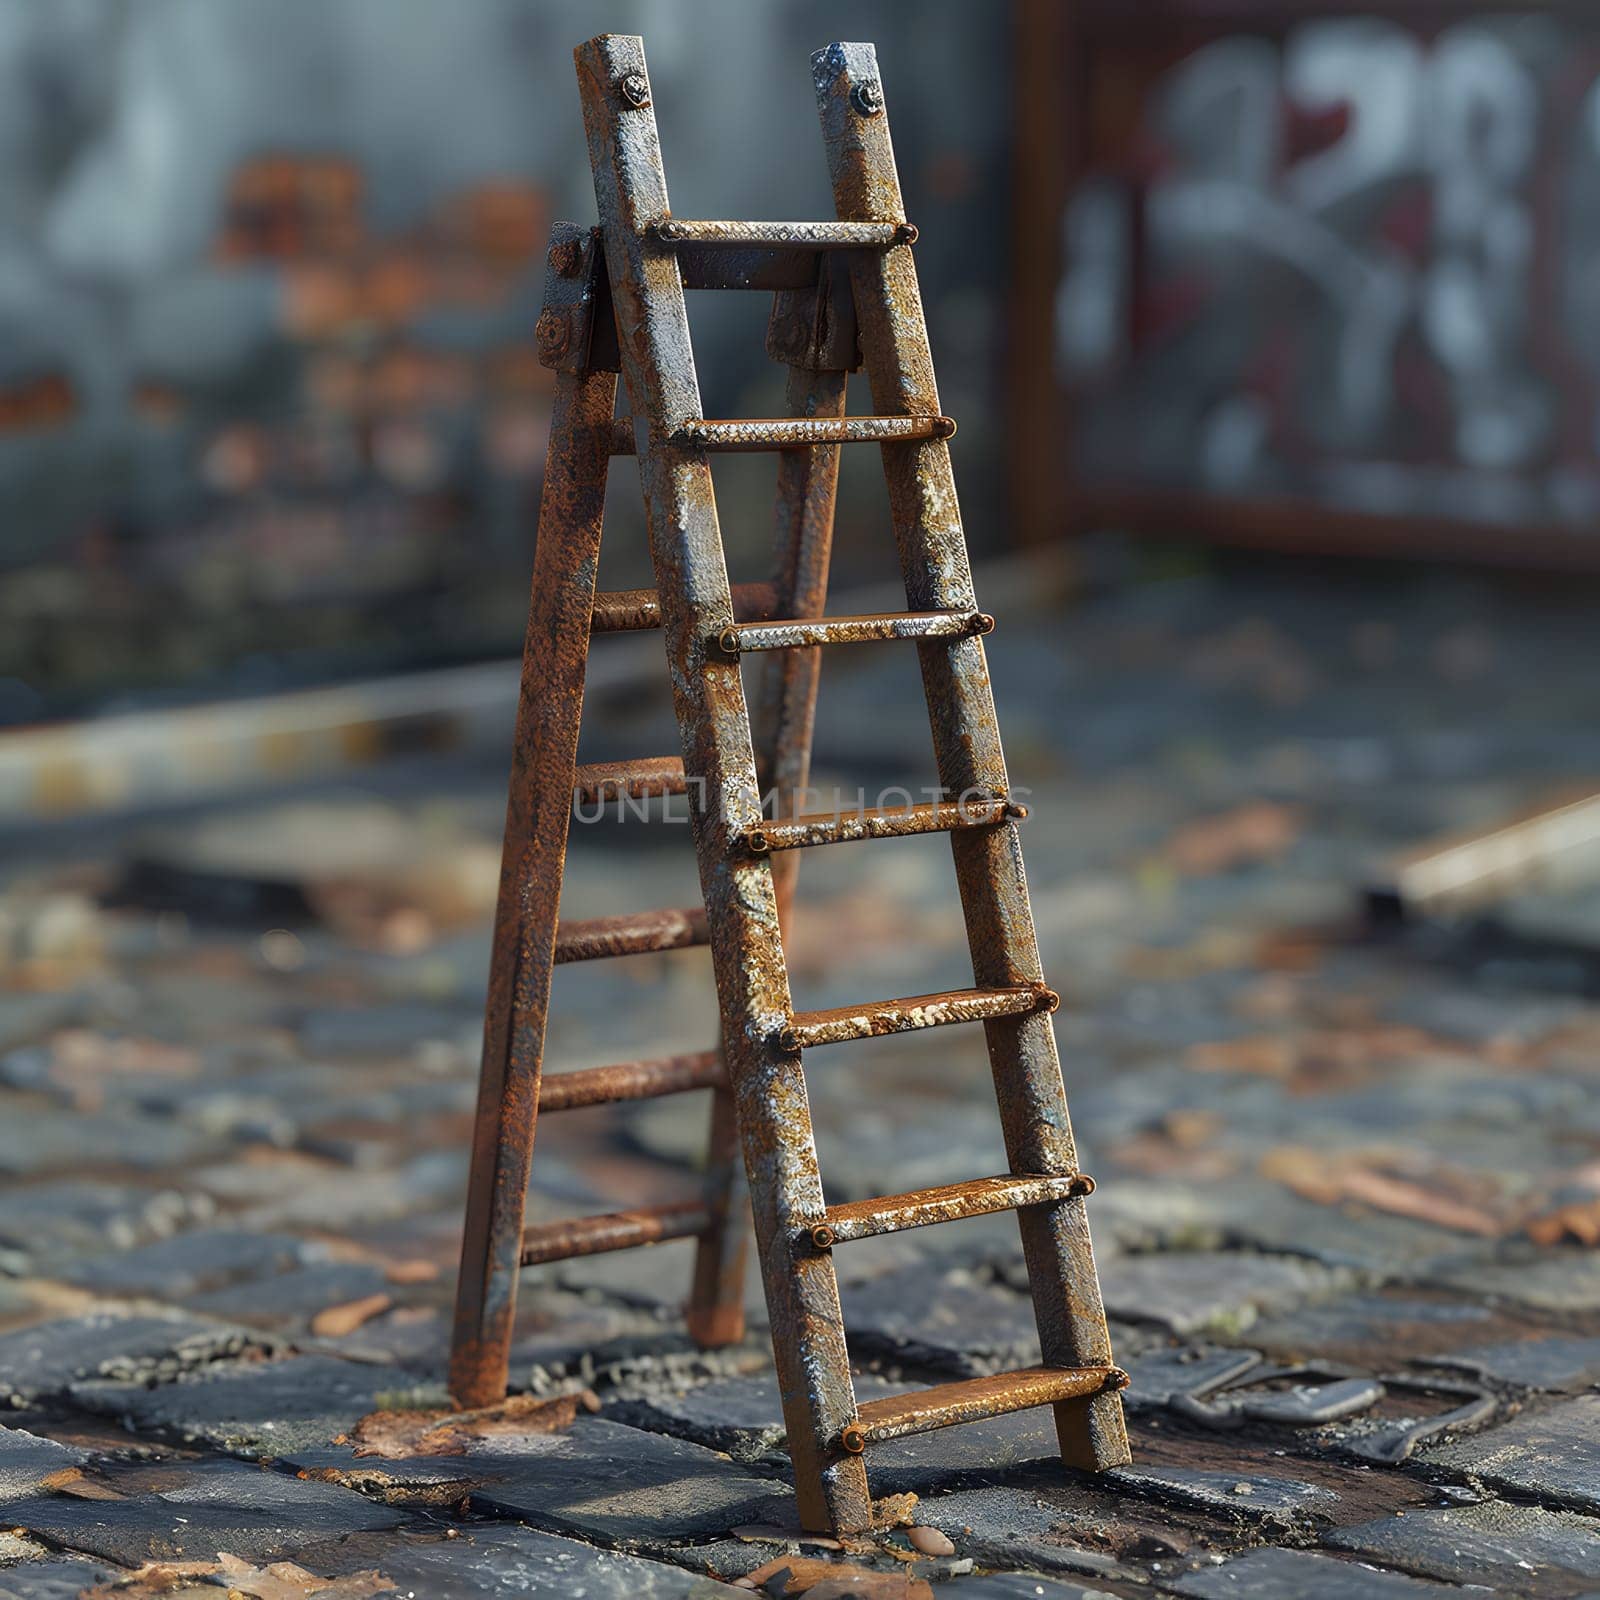 A wooden ladder is propped up on a cobblestone street. The rusty metal rungs form a triangular shape, creating a visual arts scene resembling still life photography in the darkness